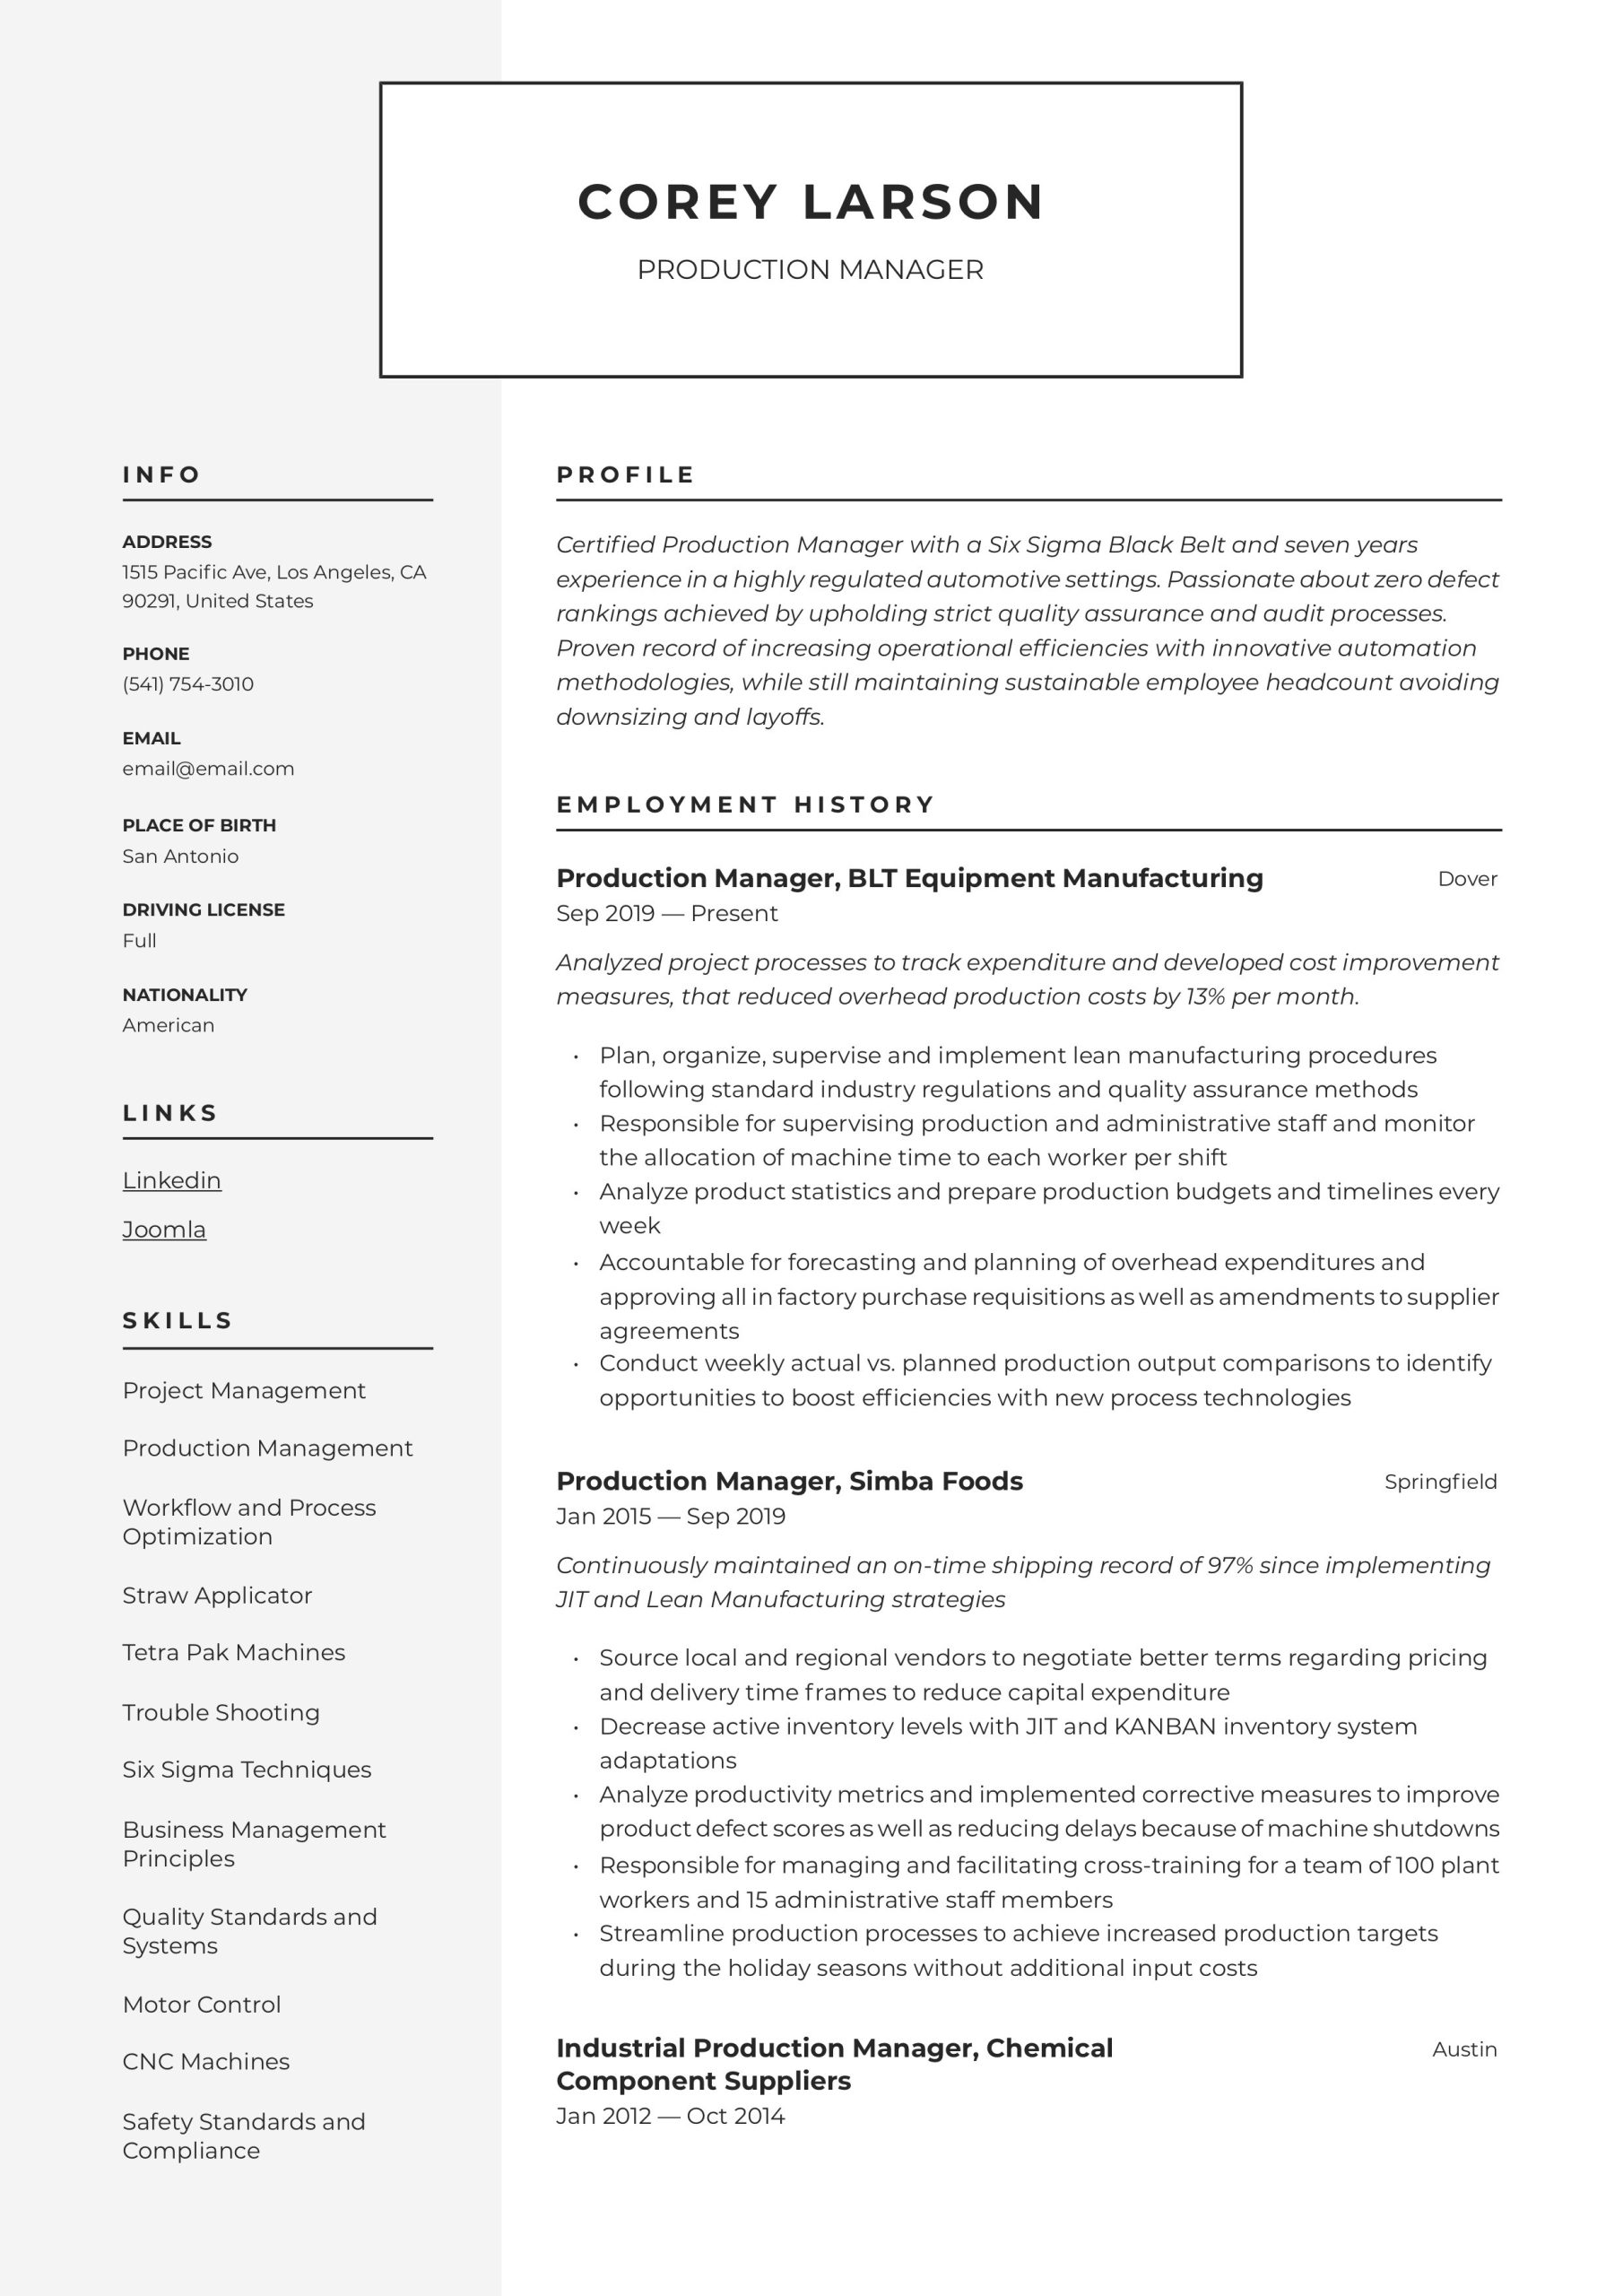 Sample Resume for Production Planning Manager Production Manager Resume & Writing Guide  12 Templates 2020